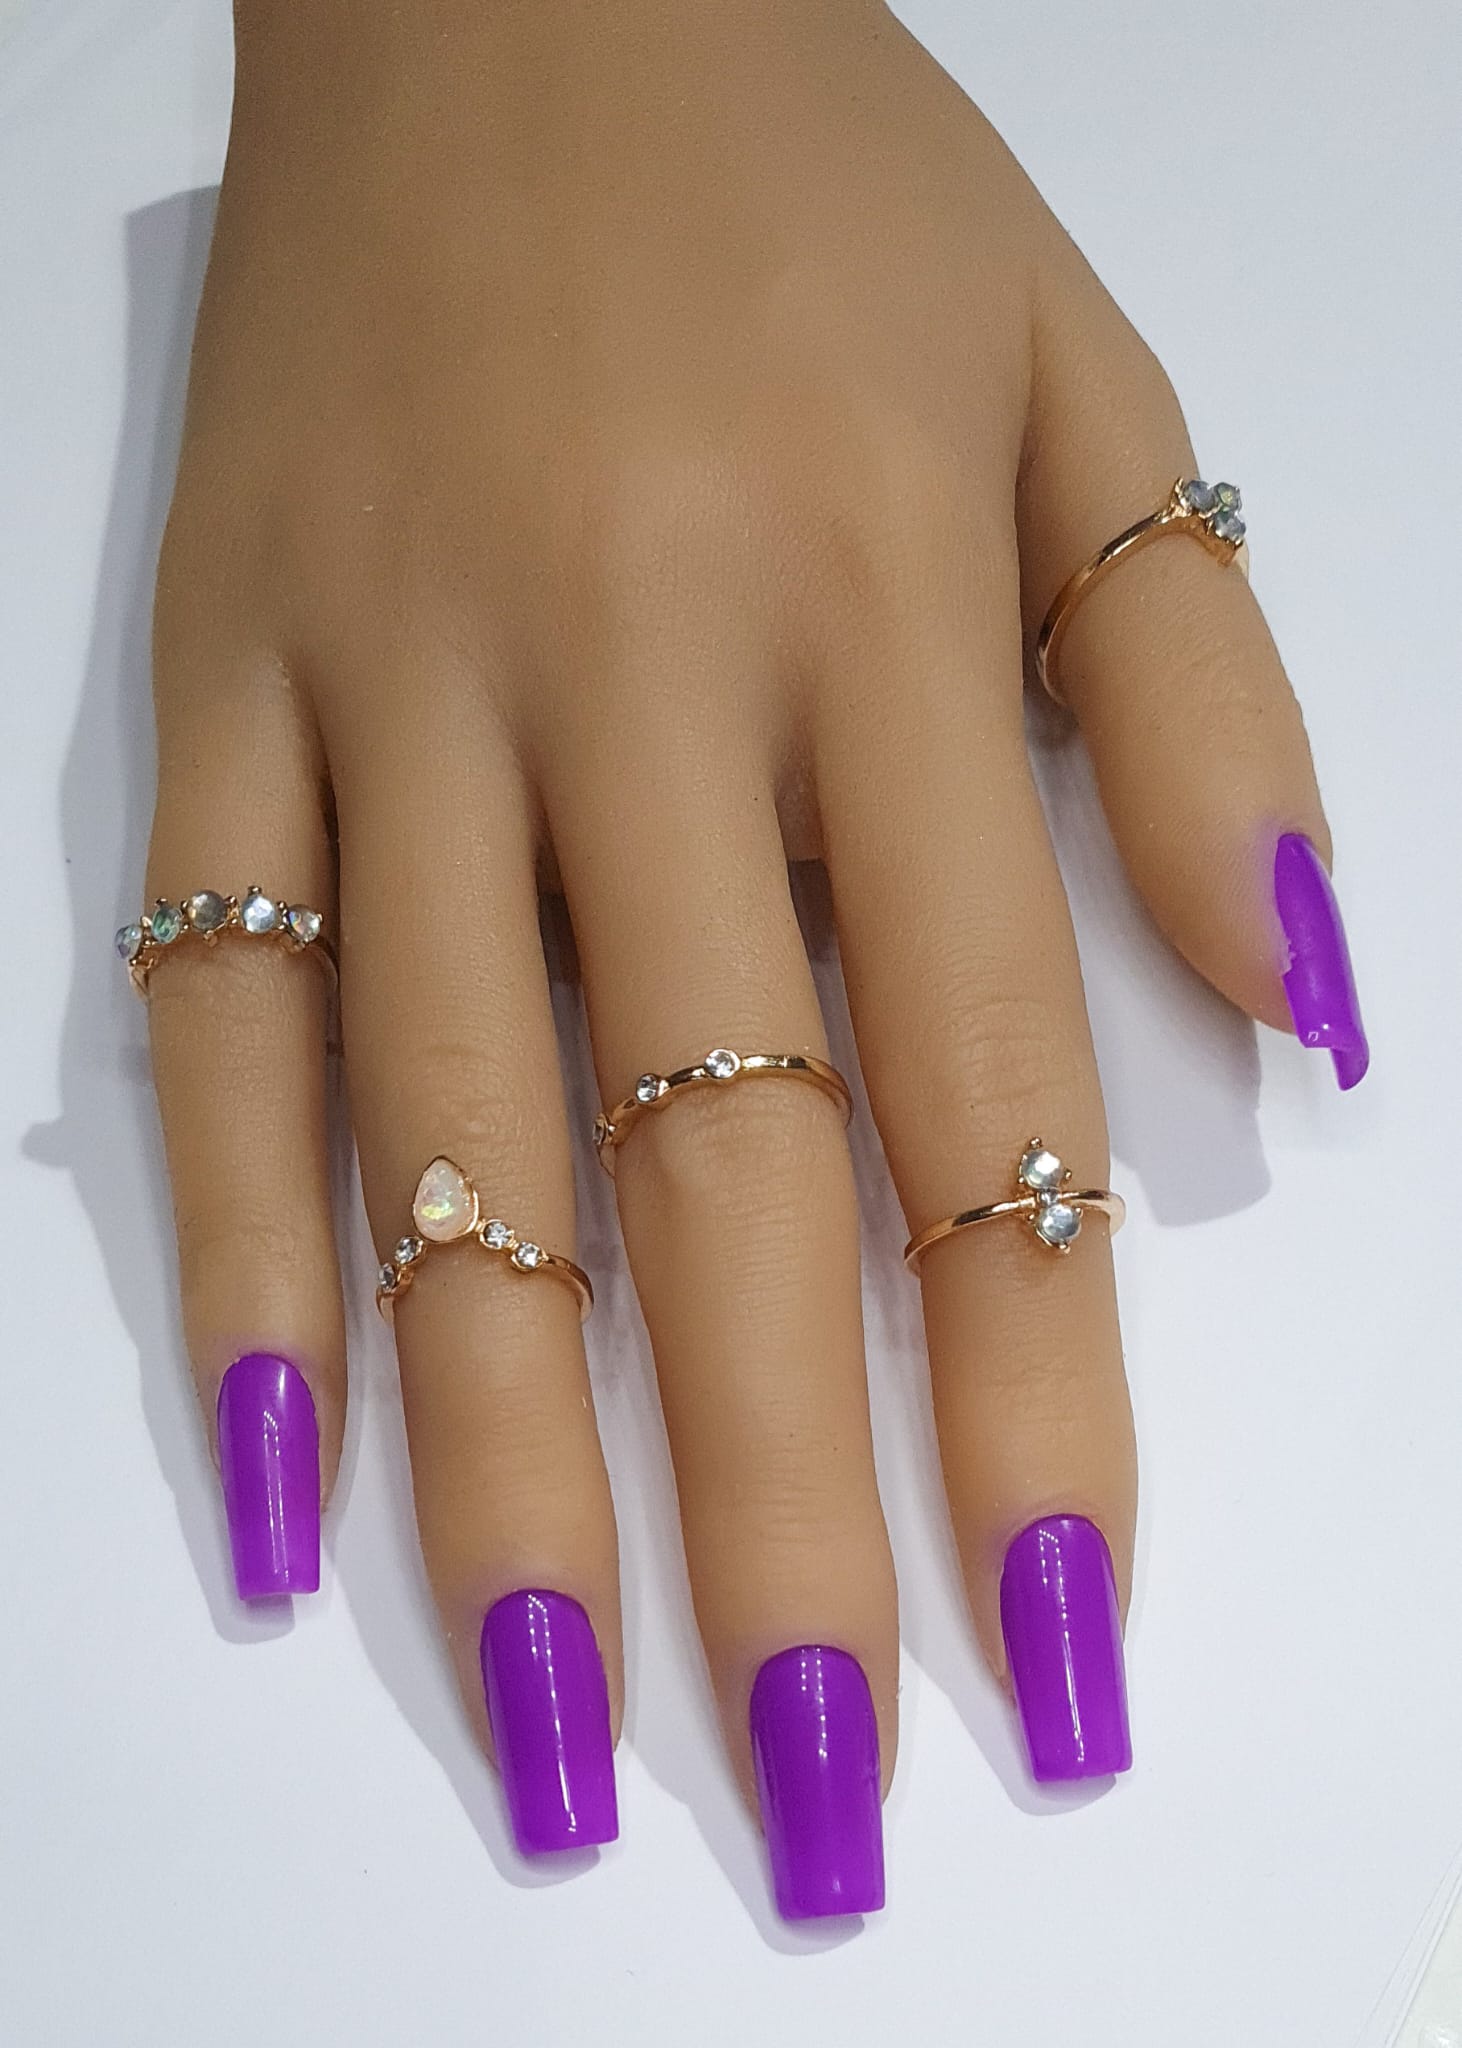 Press On Nails- Medium Square Shaped Basic Vibrant Bright Purple Spring/Summer2023 collection full cover gel tip luxury false nails salon quality hand painted custom made uk